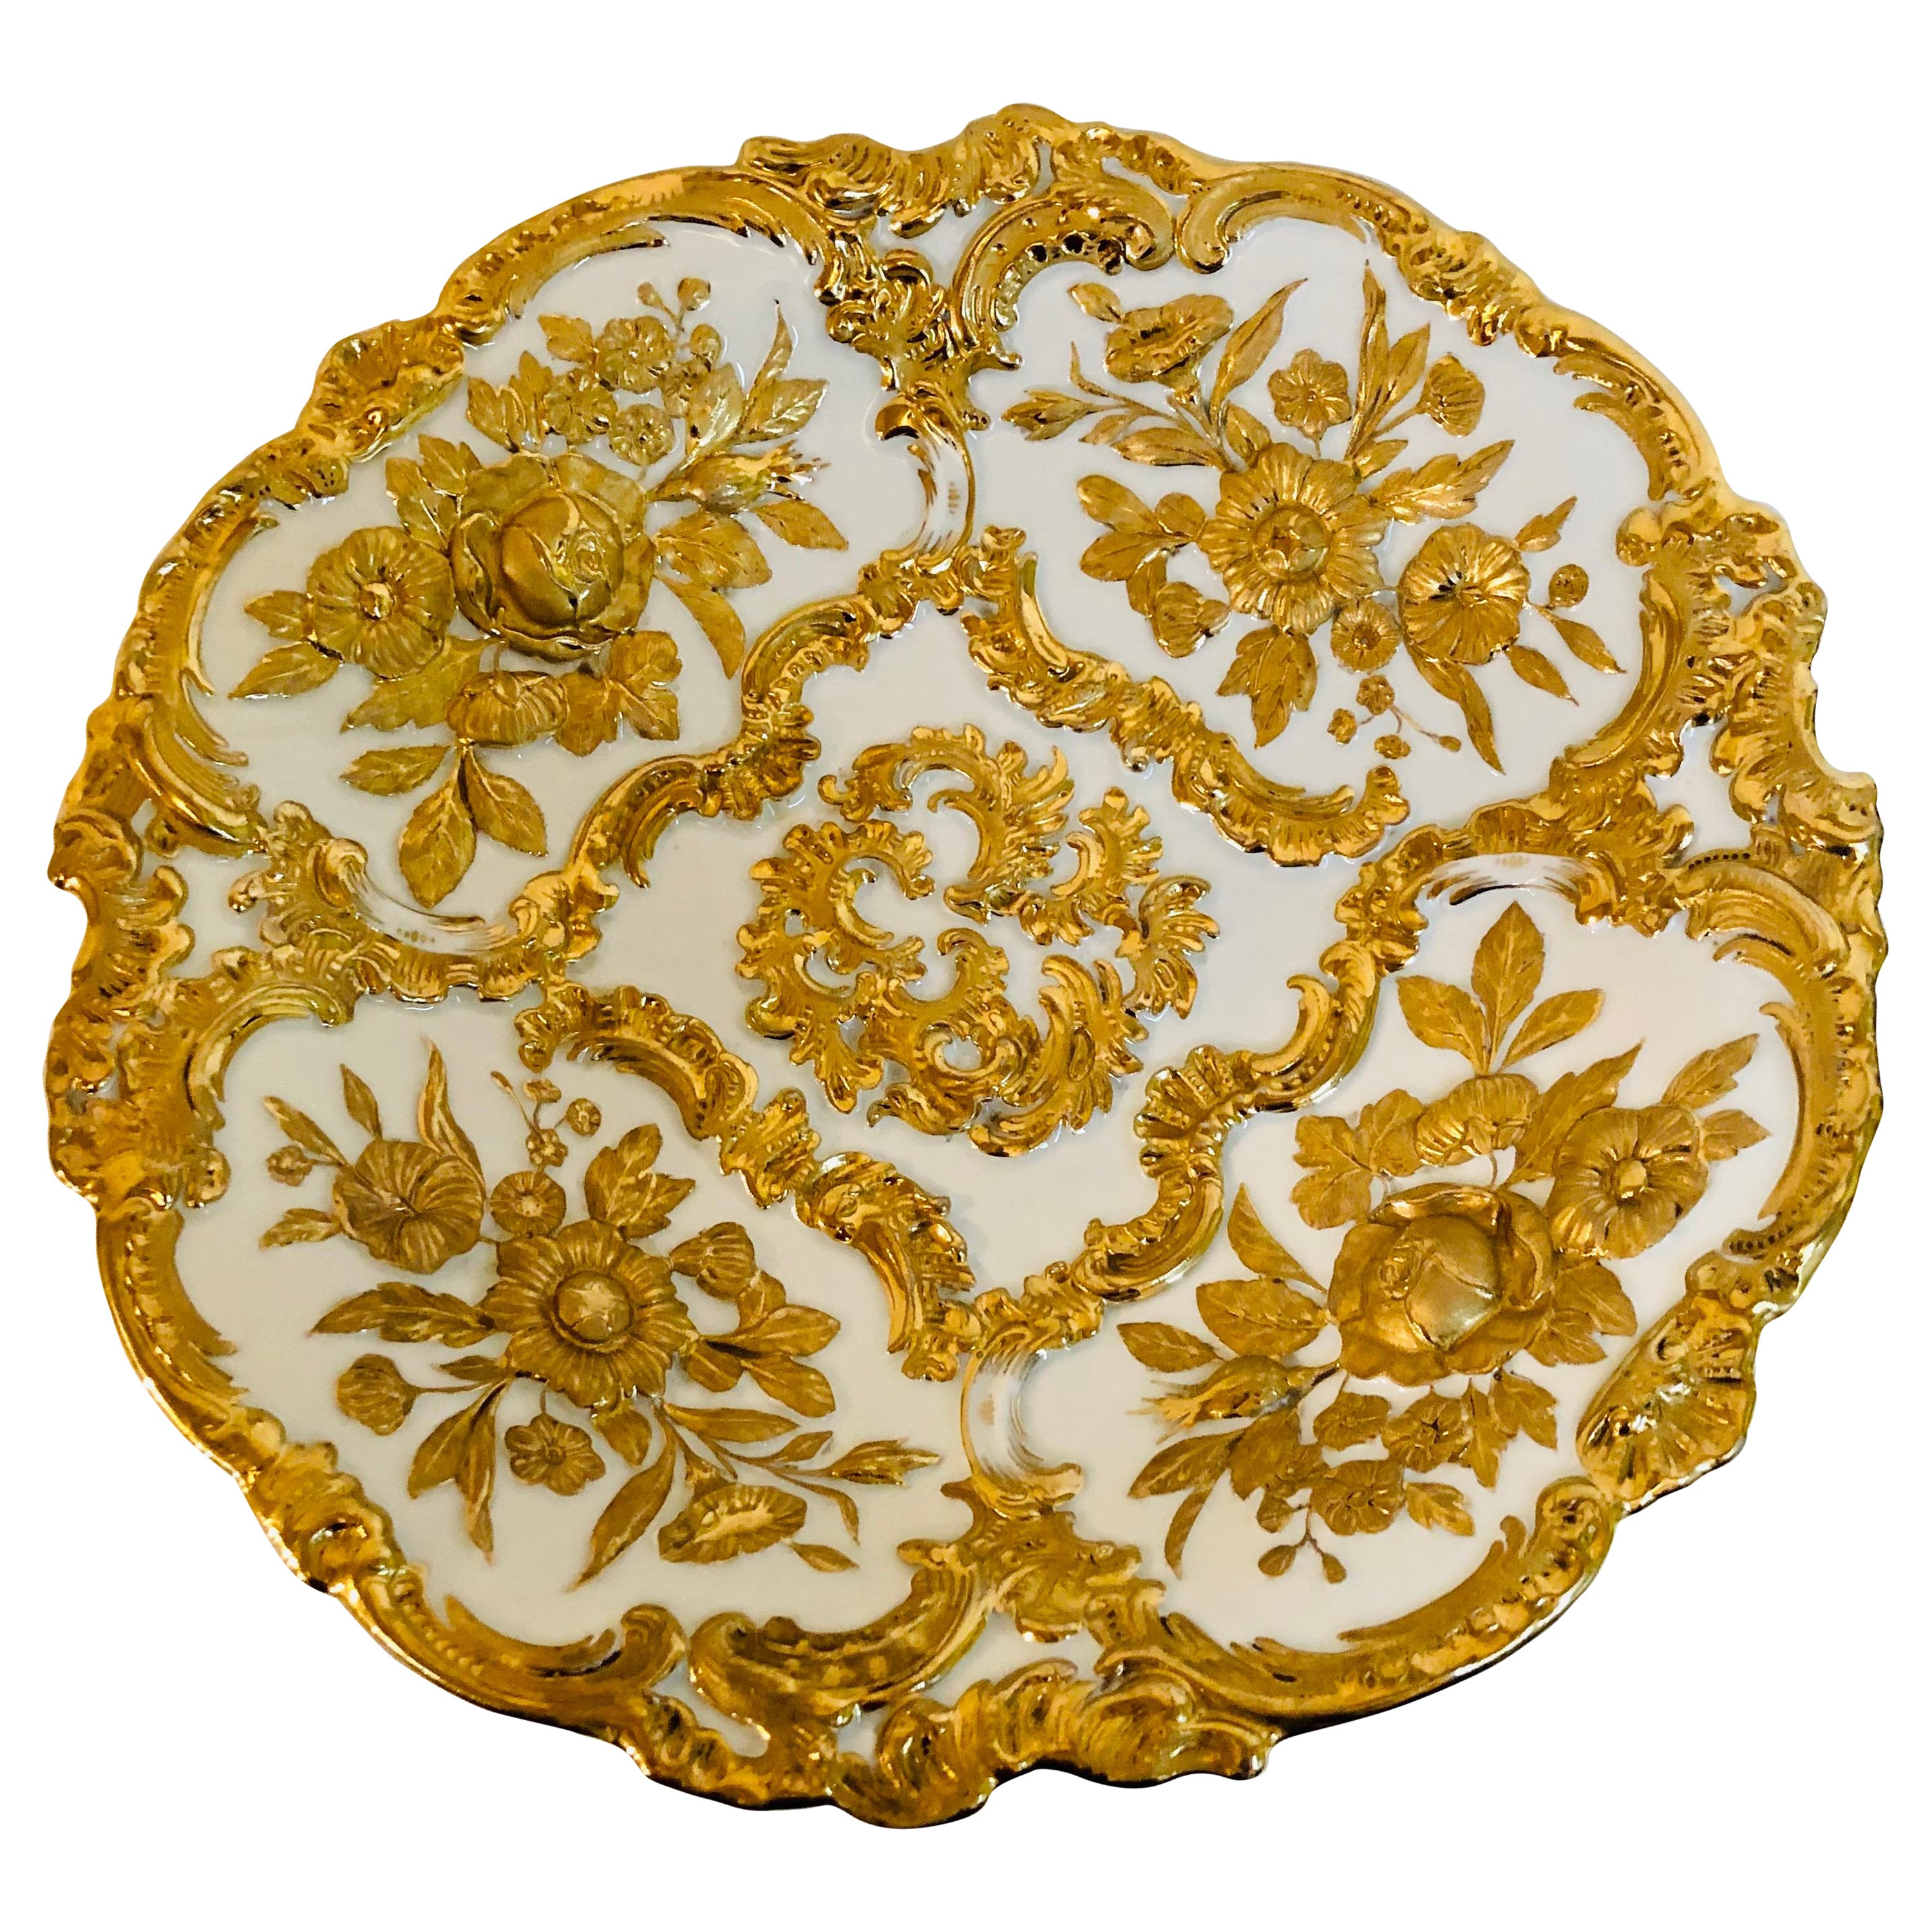 Meissen Charger With Raised Gilded Flowers & Leaves and Elaborate Gilded Accents